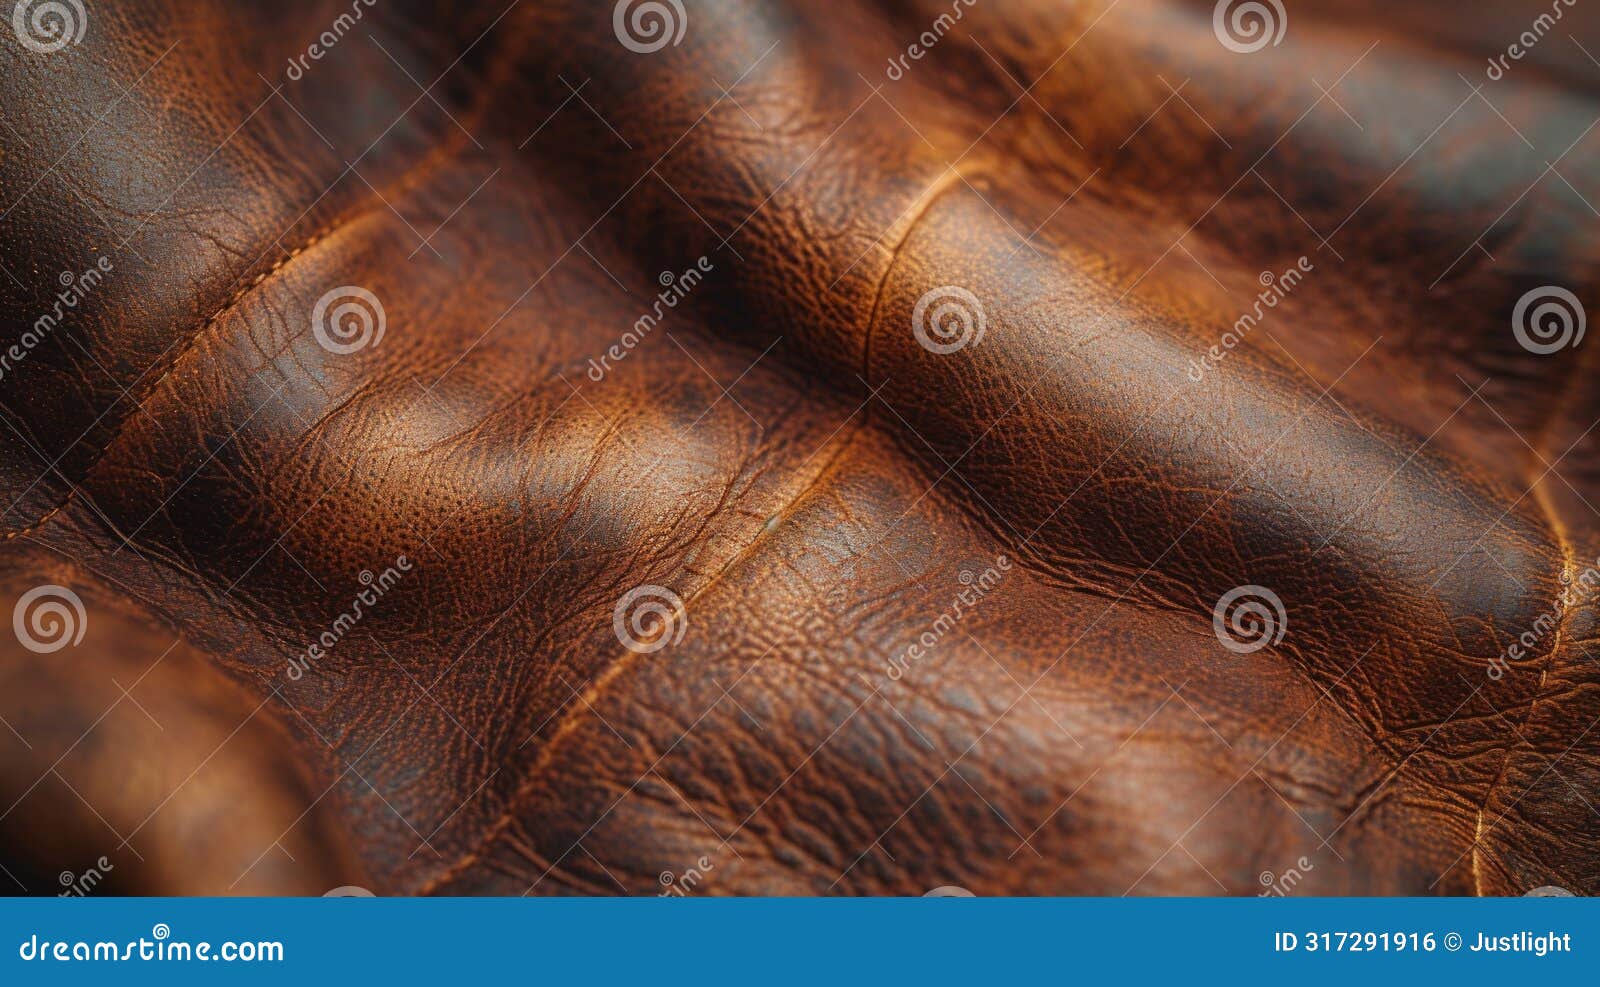 macro shot of creases in old leather revealing the history and use of the material through its texture